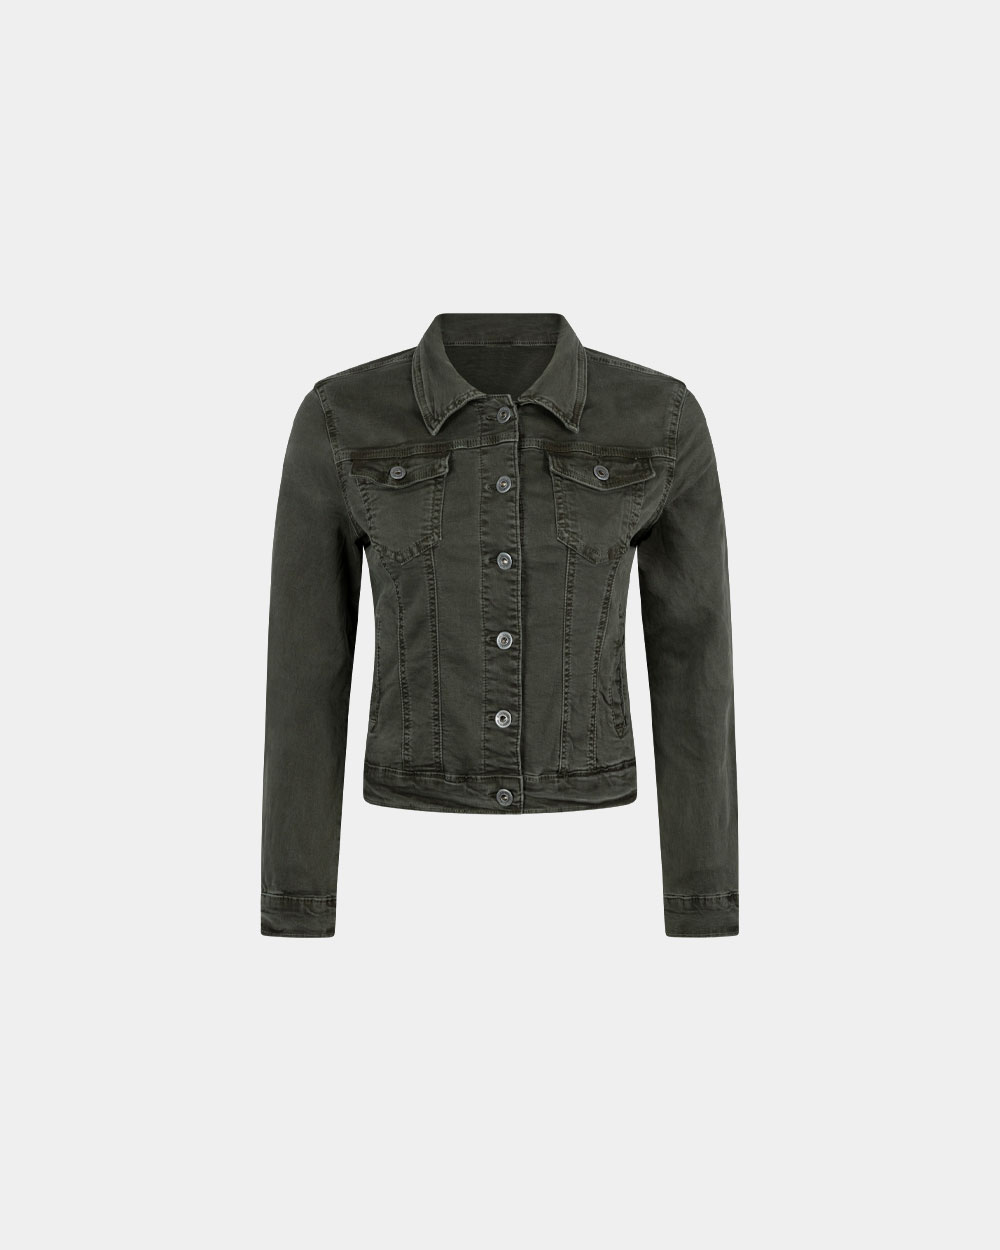 army green jeans jacket